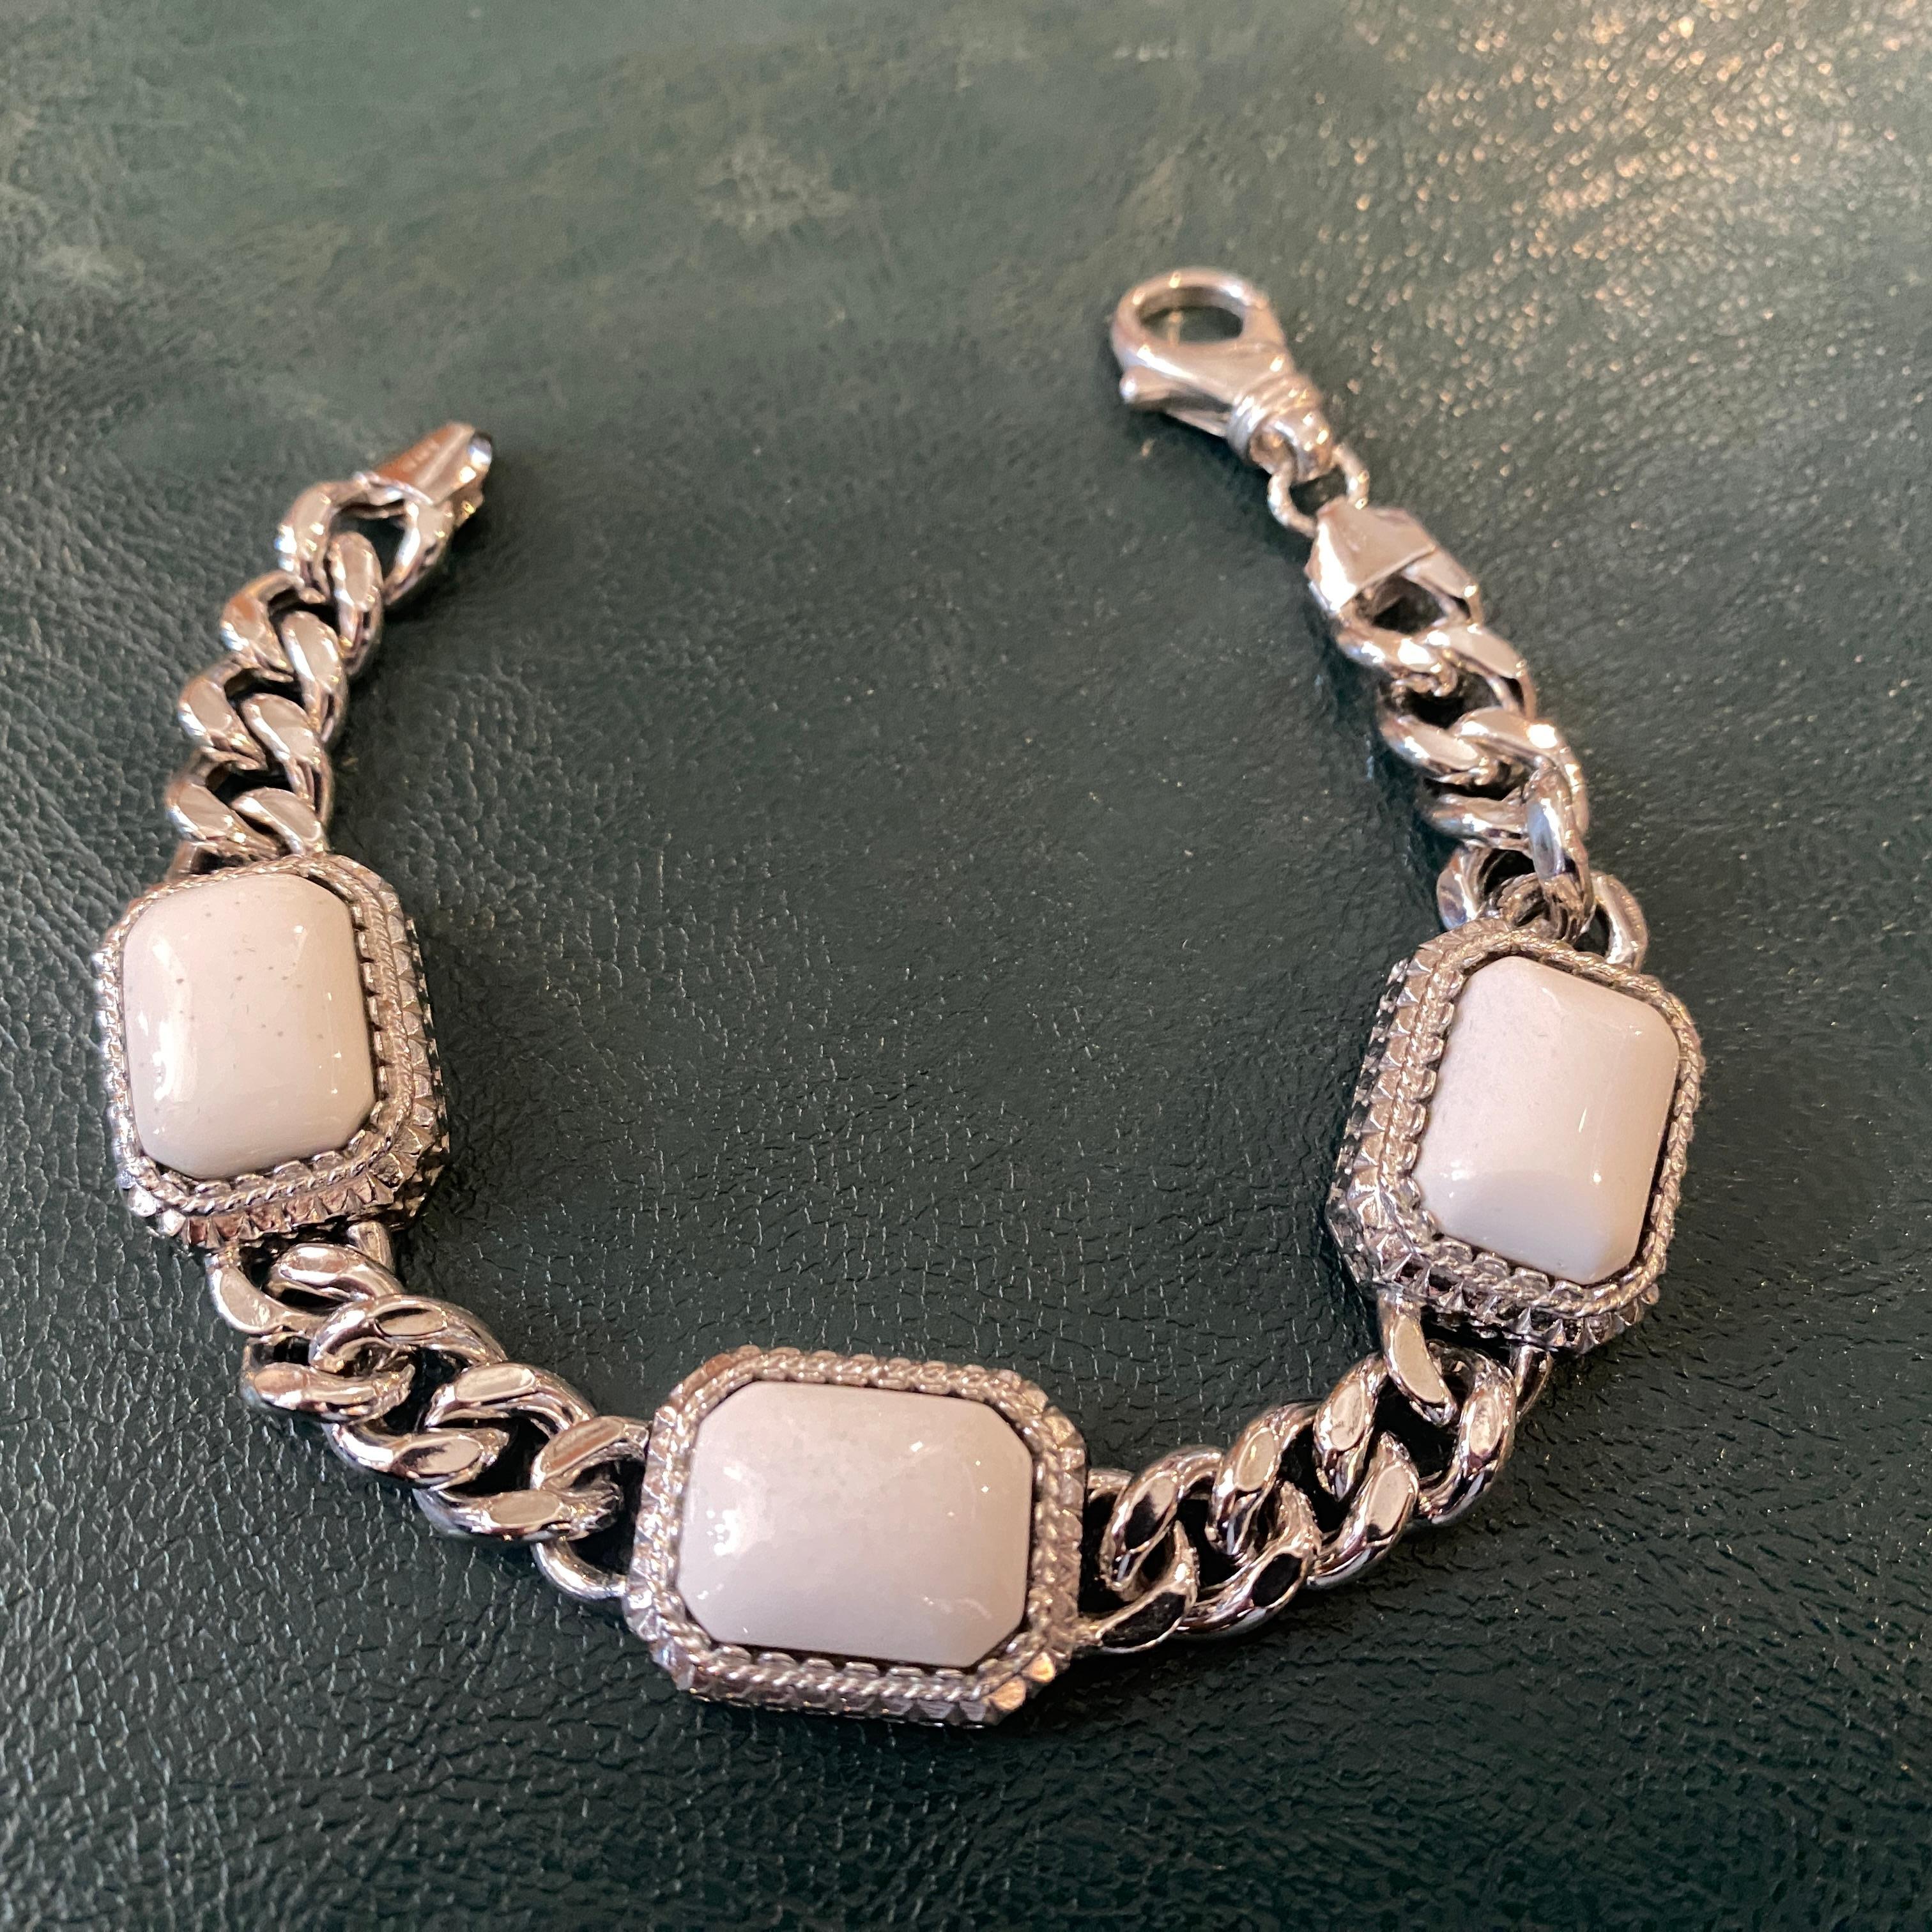 An high quality hand-crafted chanel chain bracelete with three rectangular cabochon white agate manufactured in Italy by Anomis. It's never worn and hall marked. 